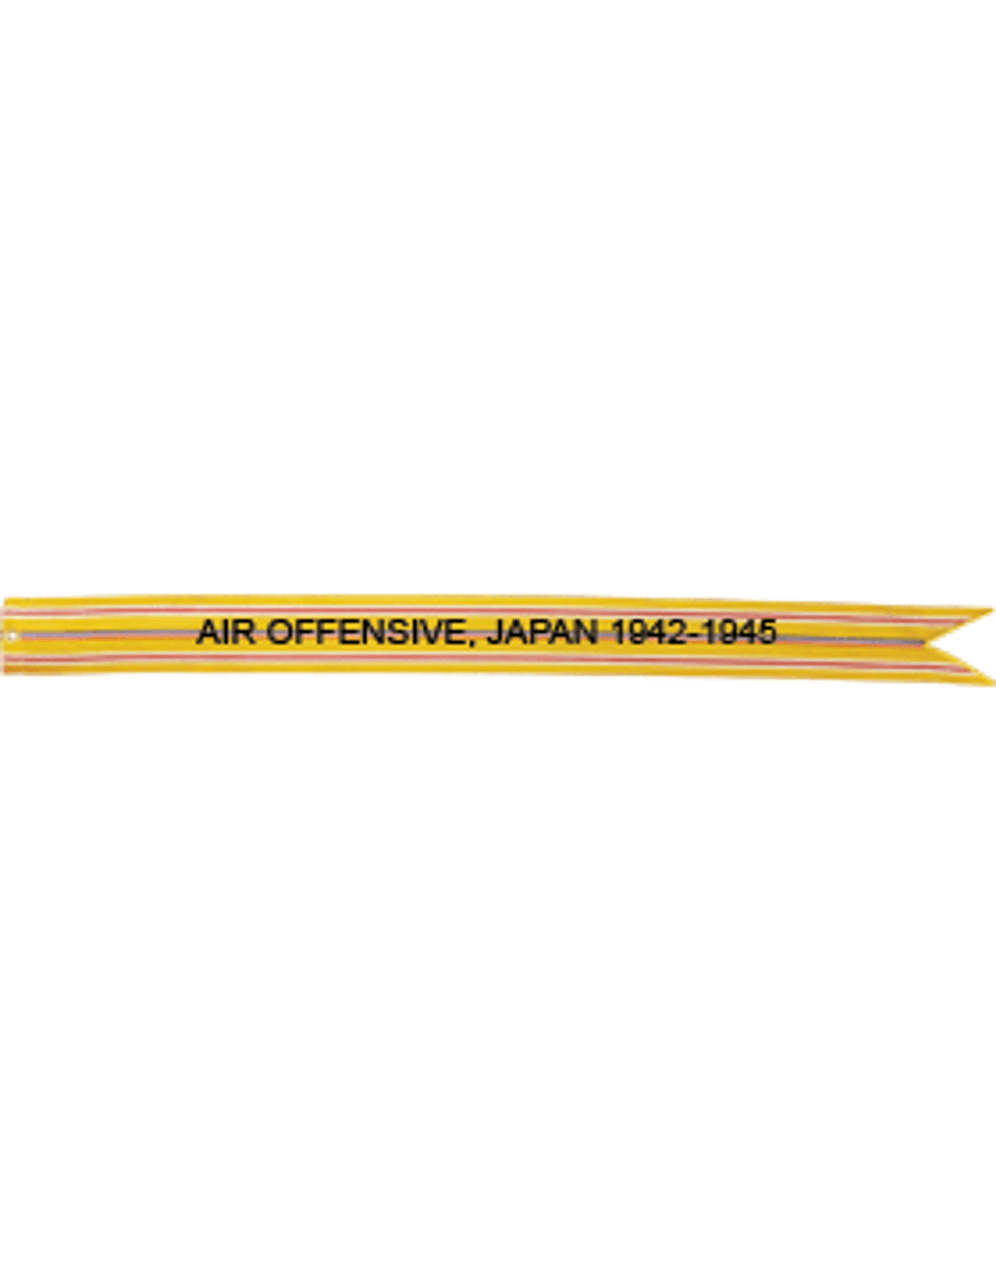 US Air Force Battle Streamer World War II, Asiatic Pacific Campaign AIR OFFENSIVE. JAPAN 1942-1945